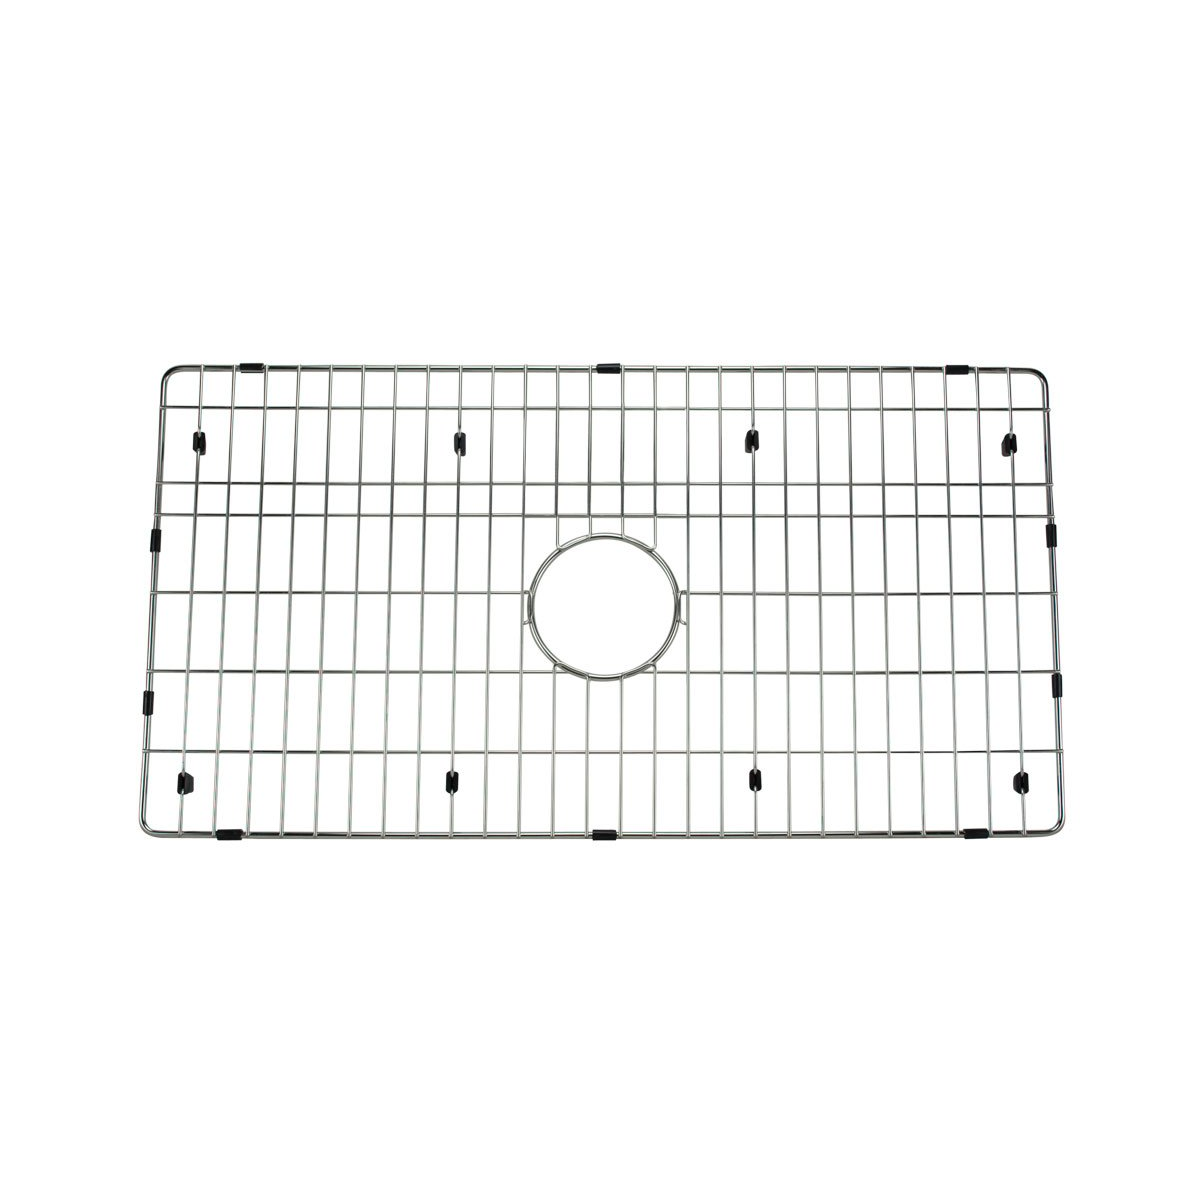 Pelican Int'l PL-VR3118 Stainless Steel Bottom Grid